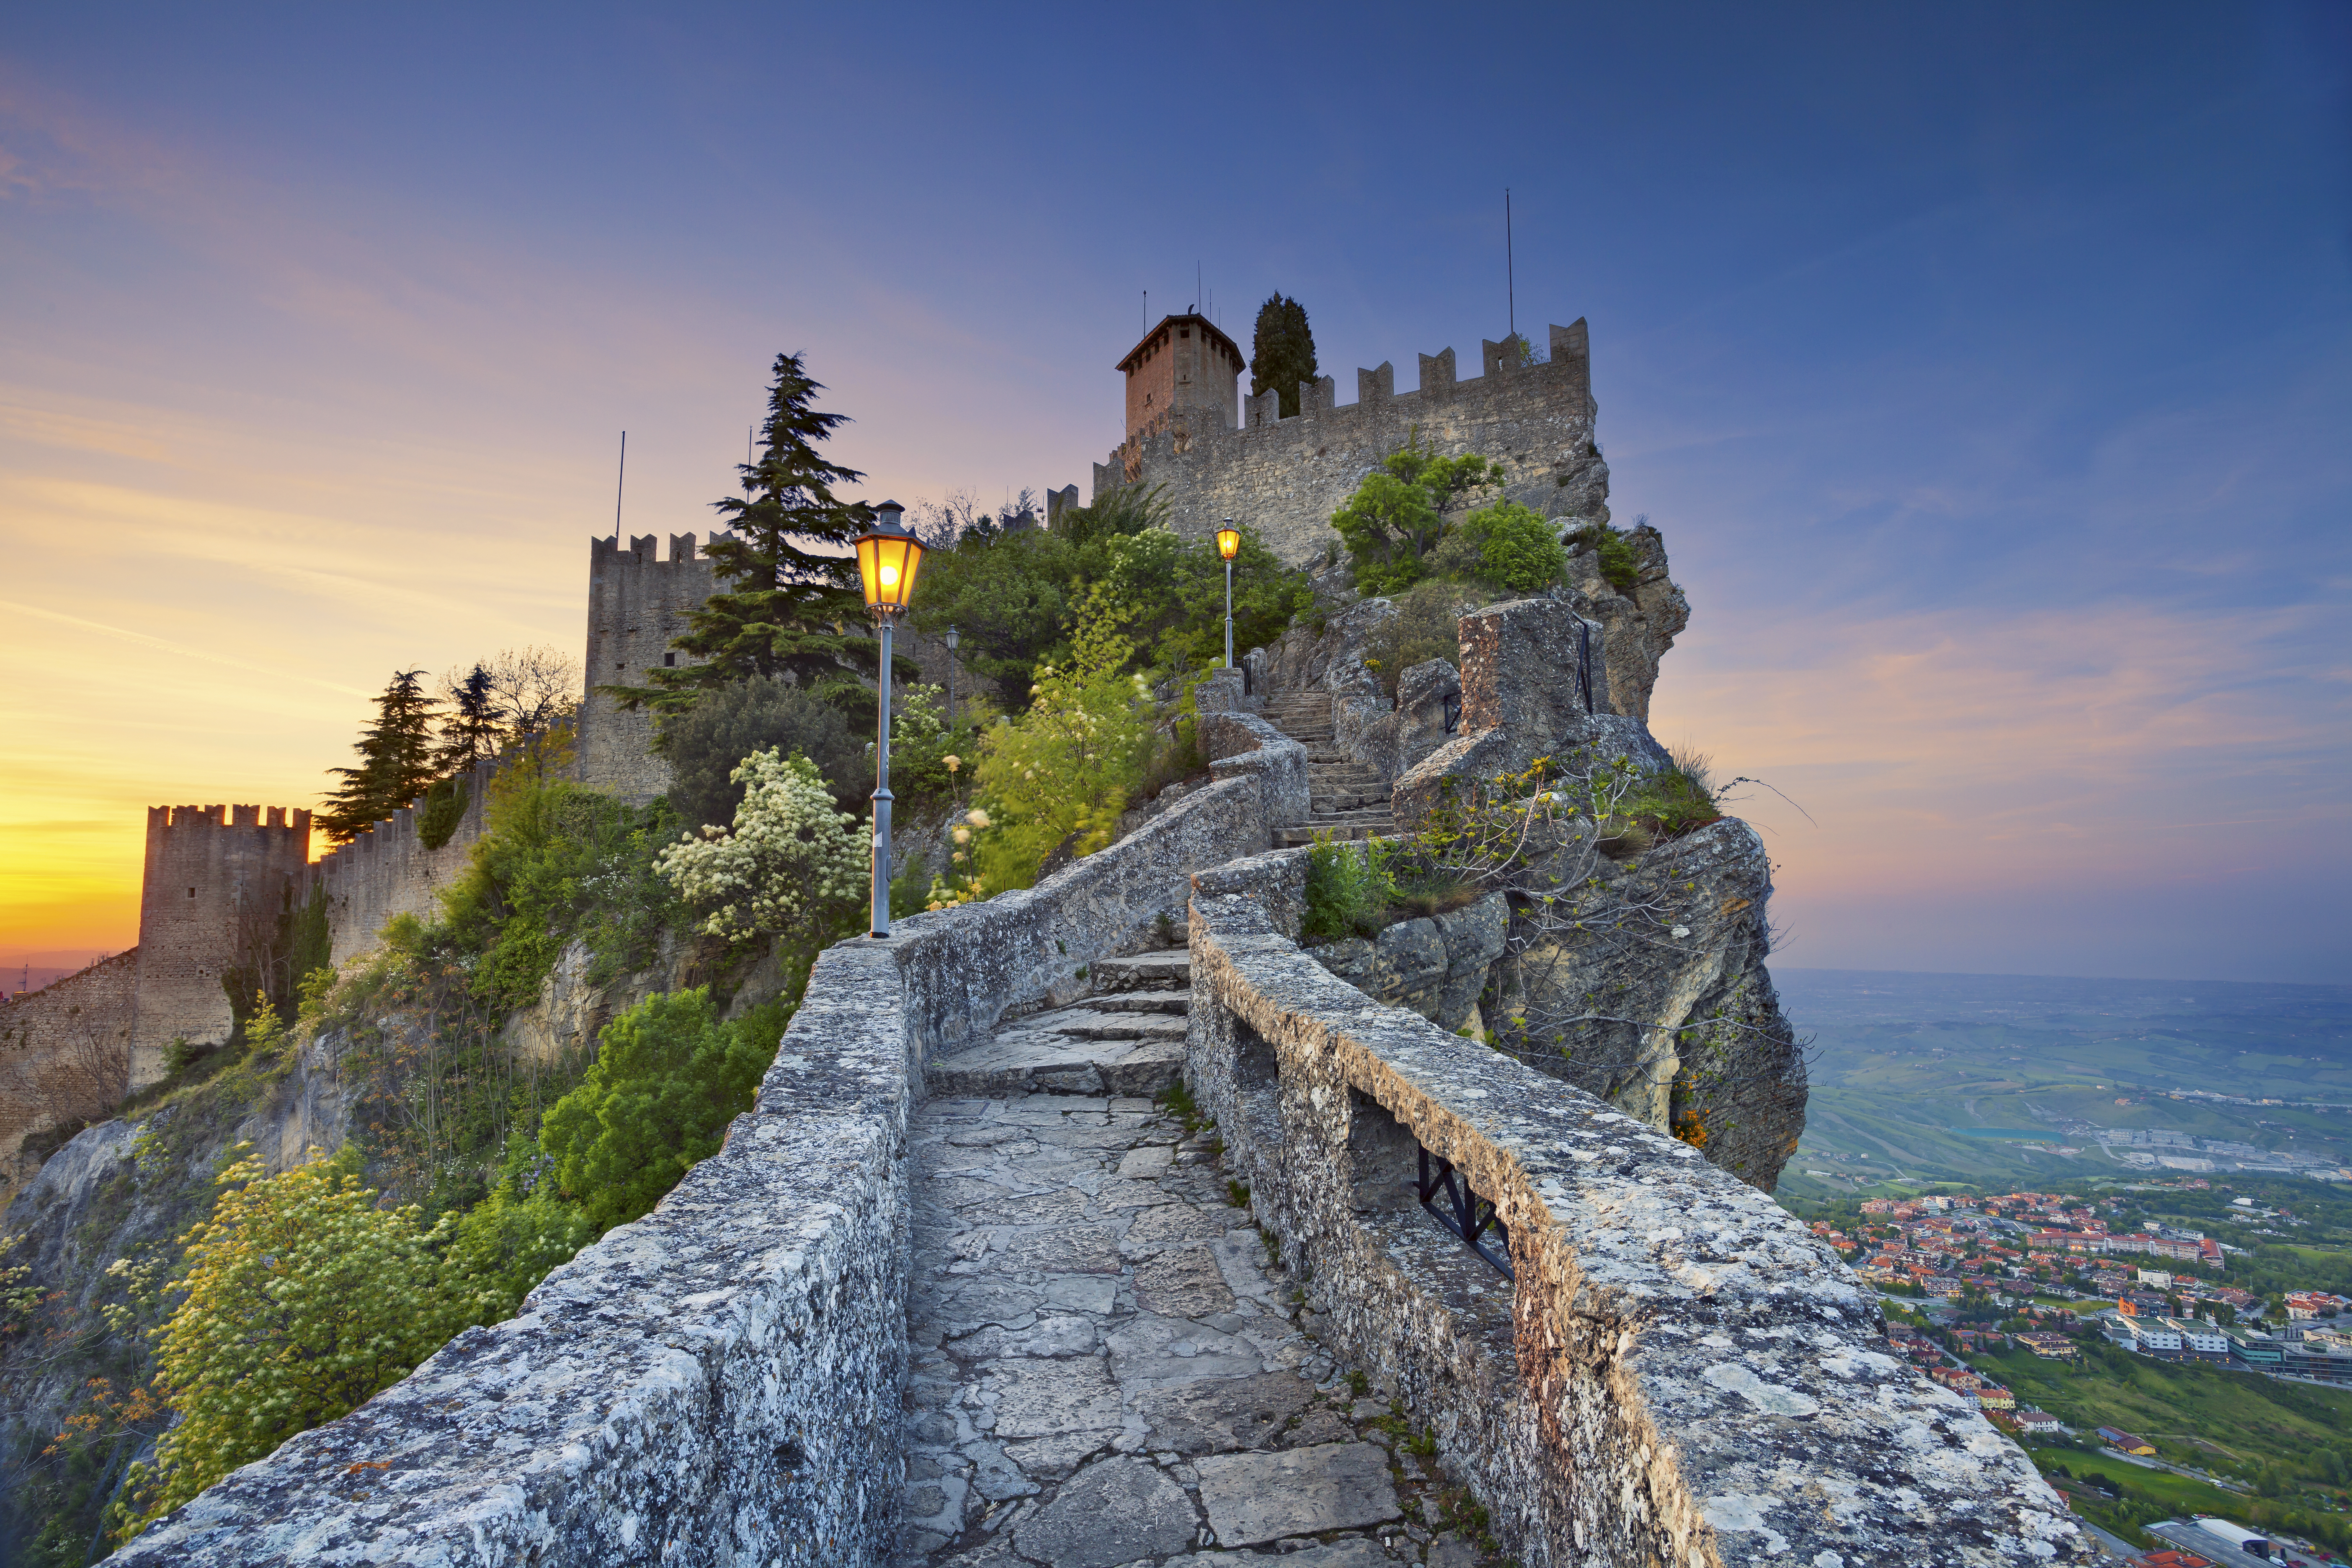 Consider These Lesser-Known Countries for Your Next Vacation - San Marino